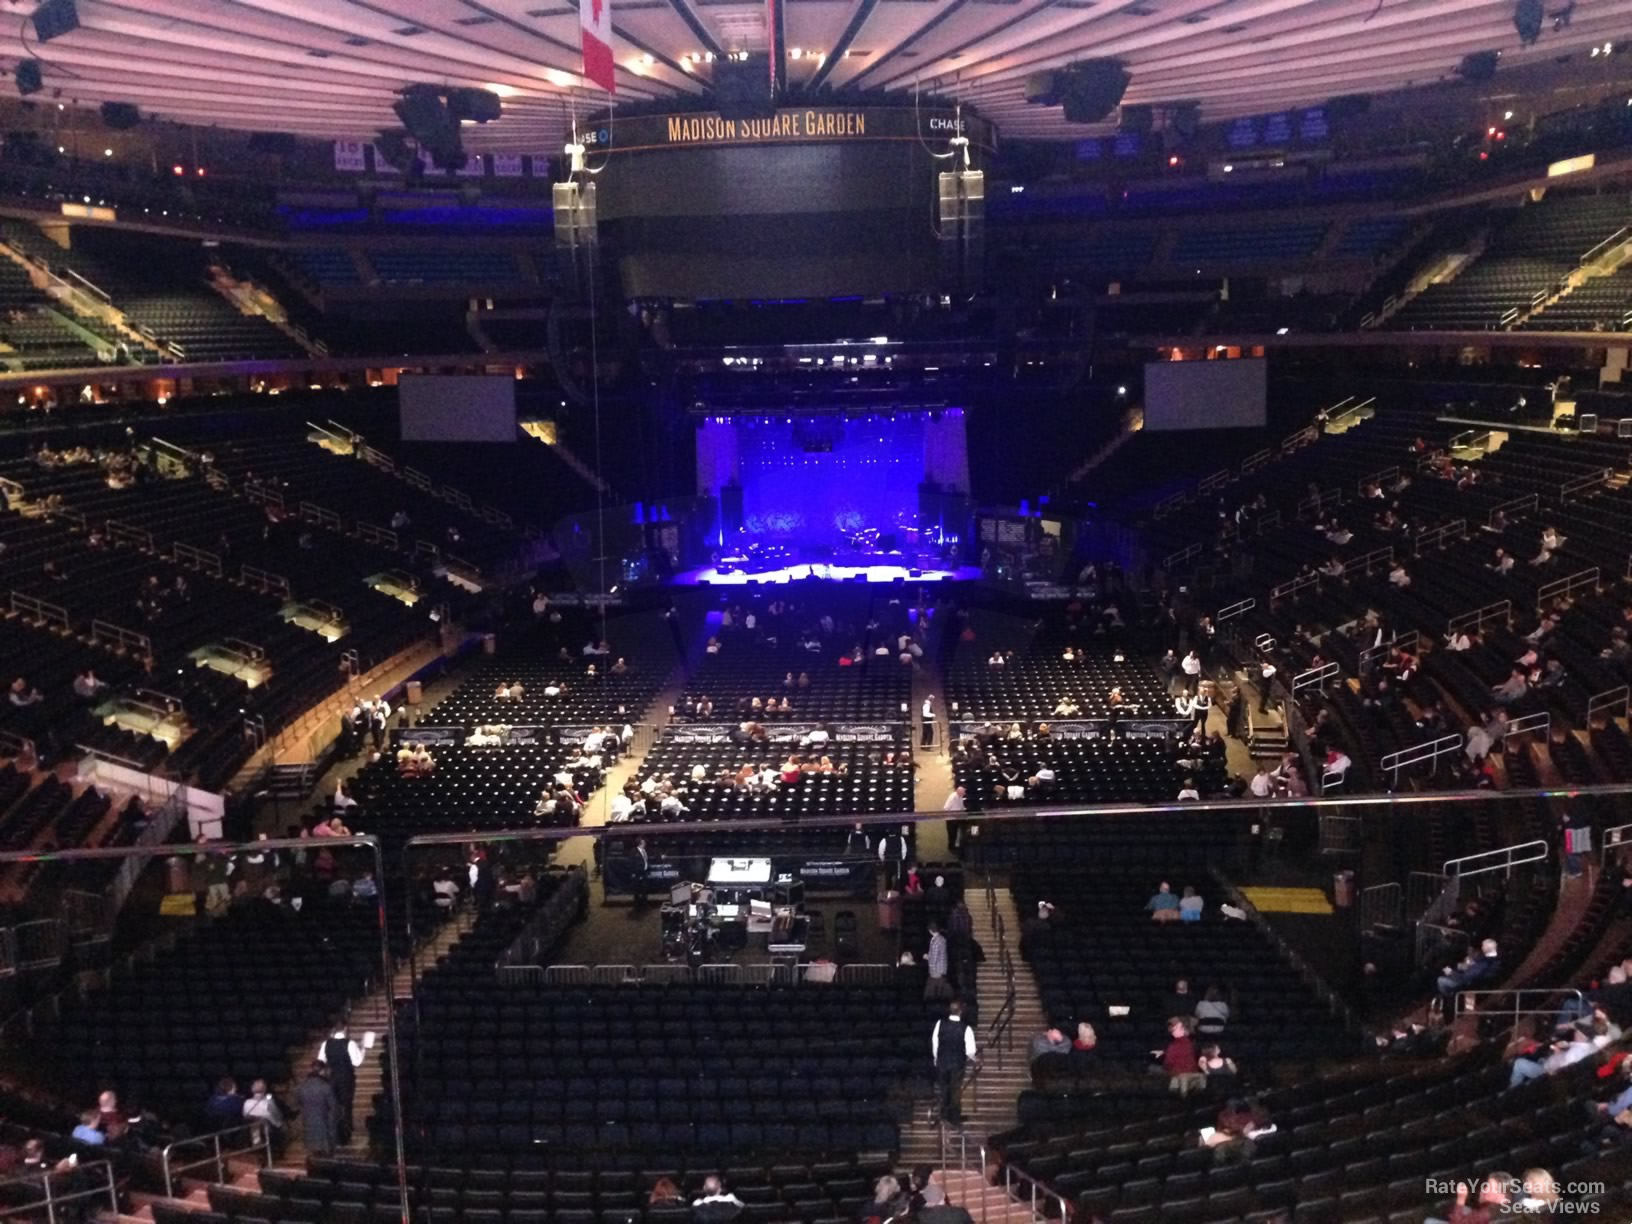 section 204, row 2 seat view  for concert - madison square garden